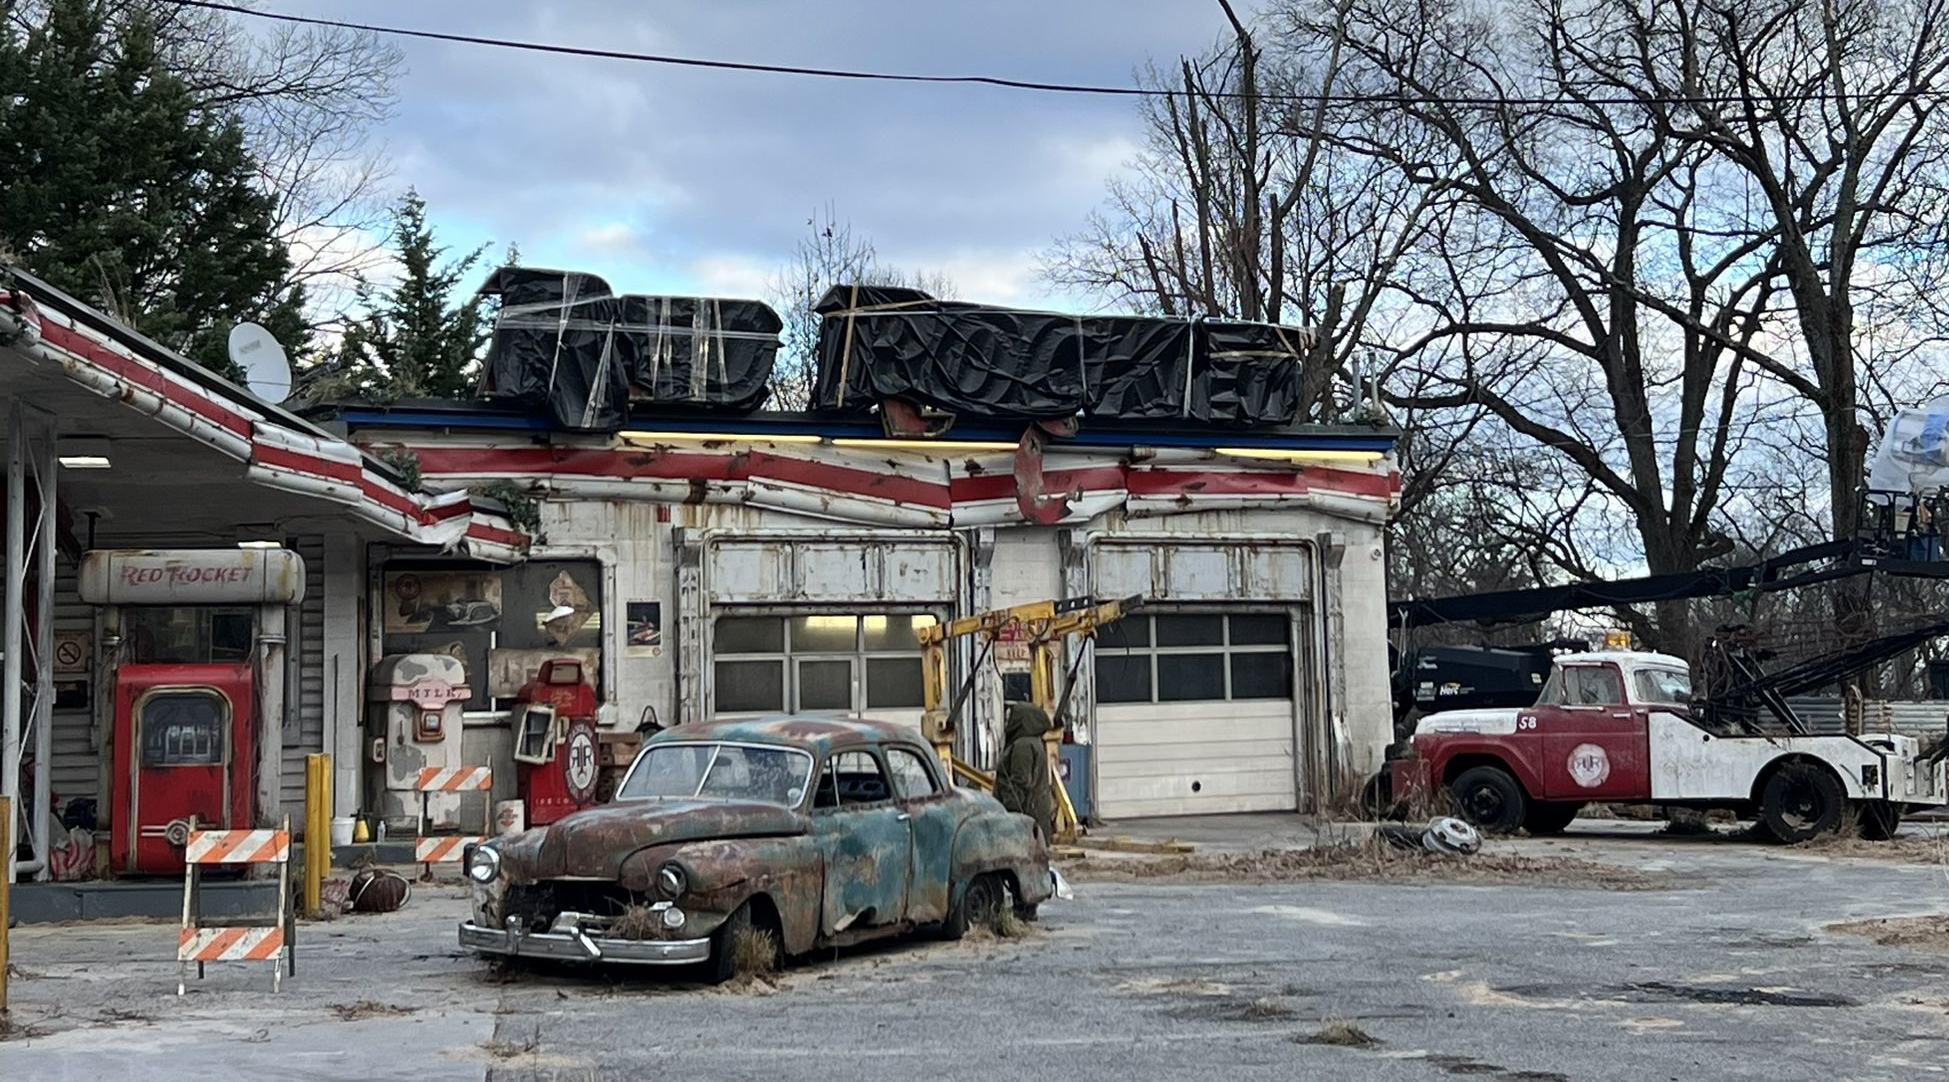 Fallout TV series red rocket gas station